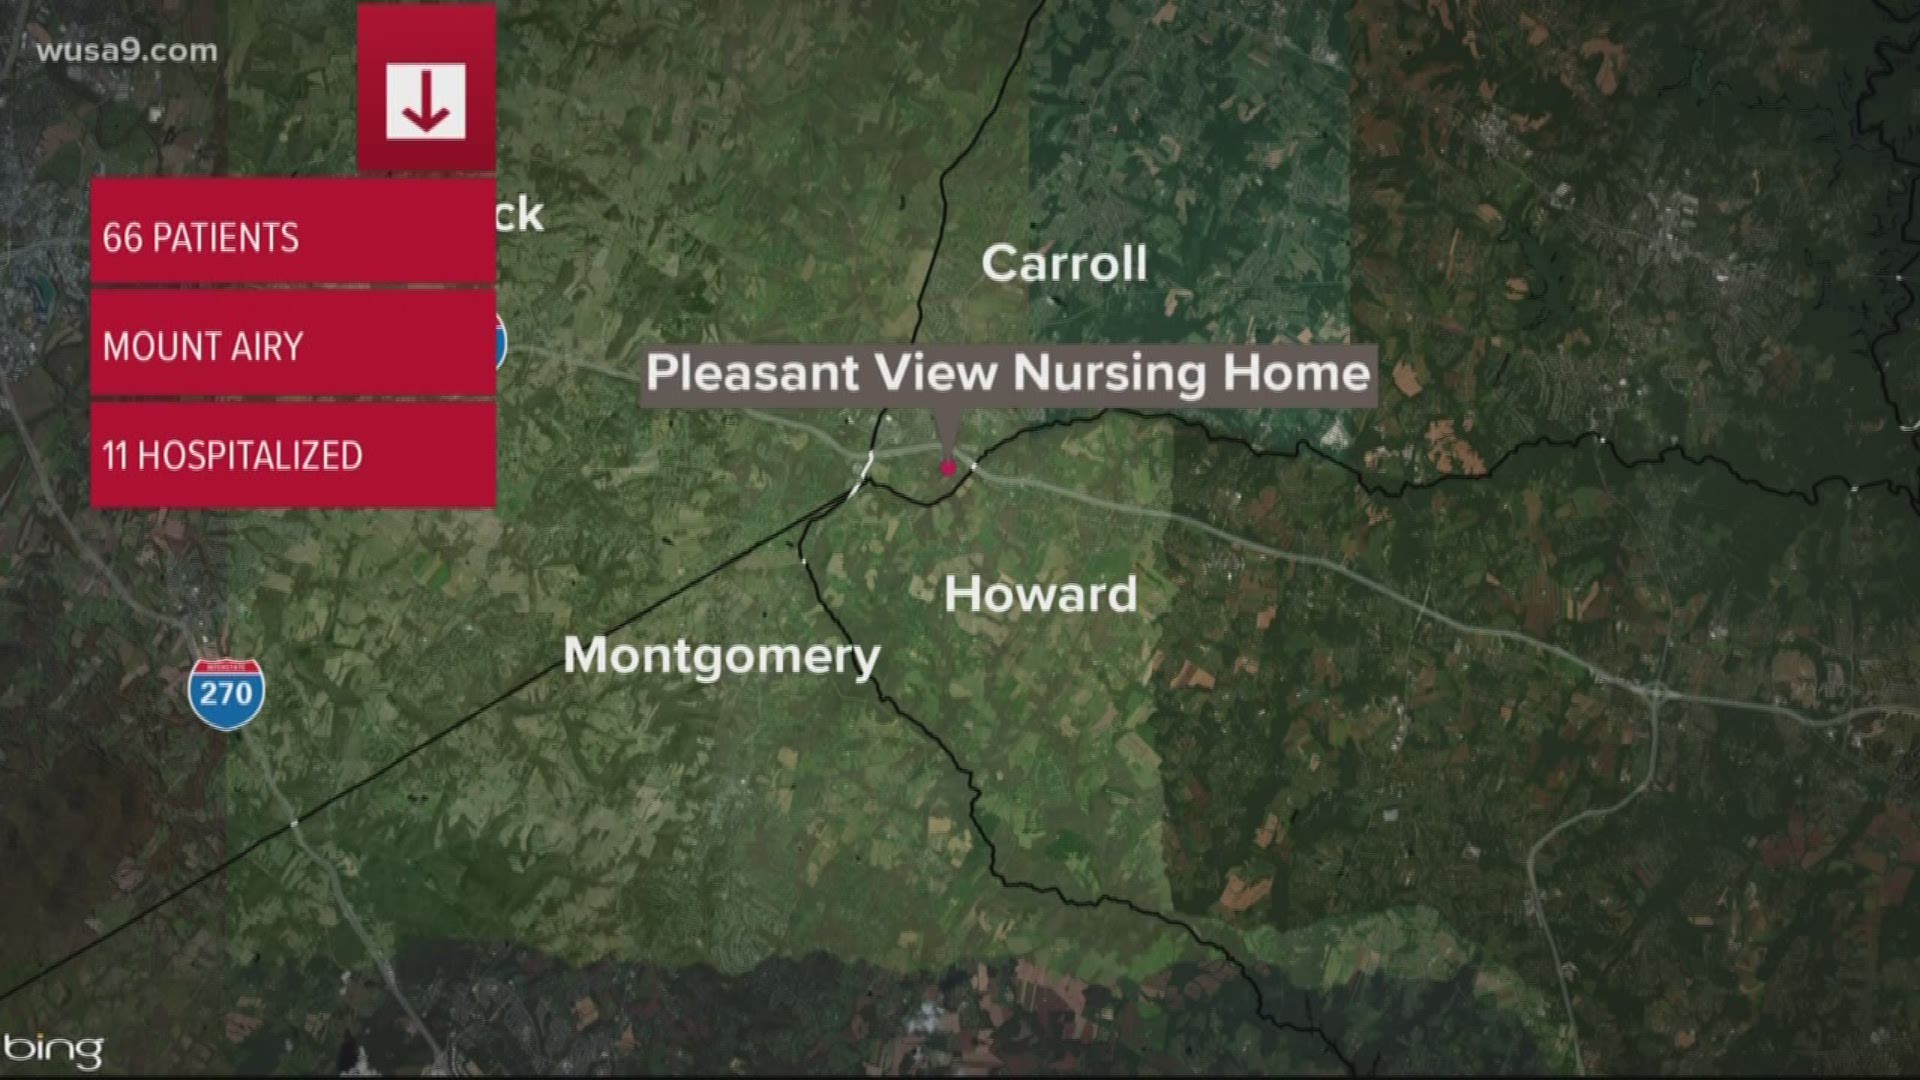 Gov. Larry Hogan announced the nursing home outbreak along with five new deaths in the state, bringing the total to 10.